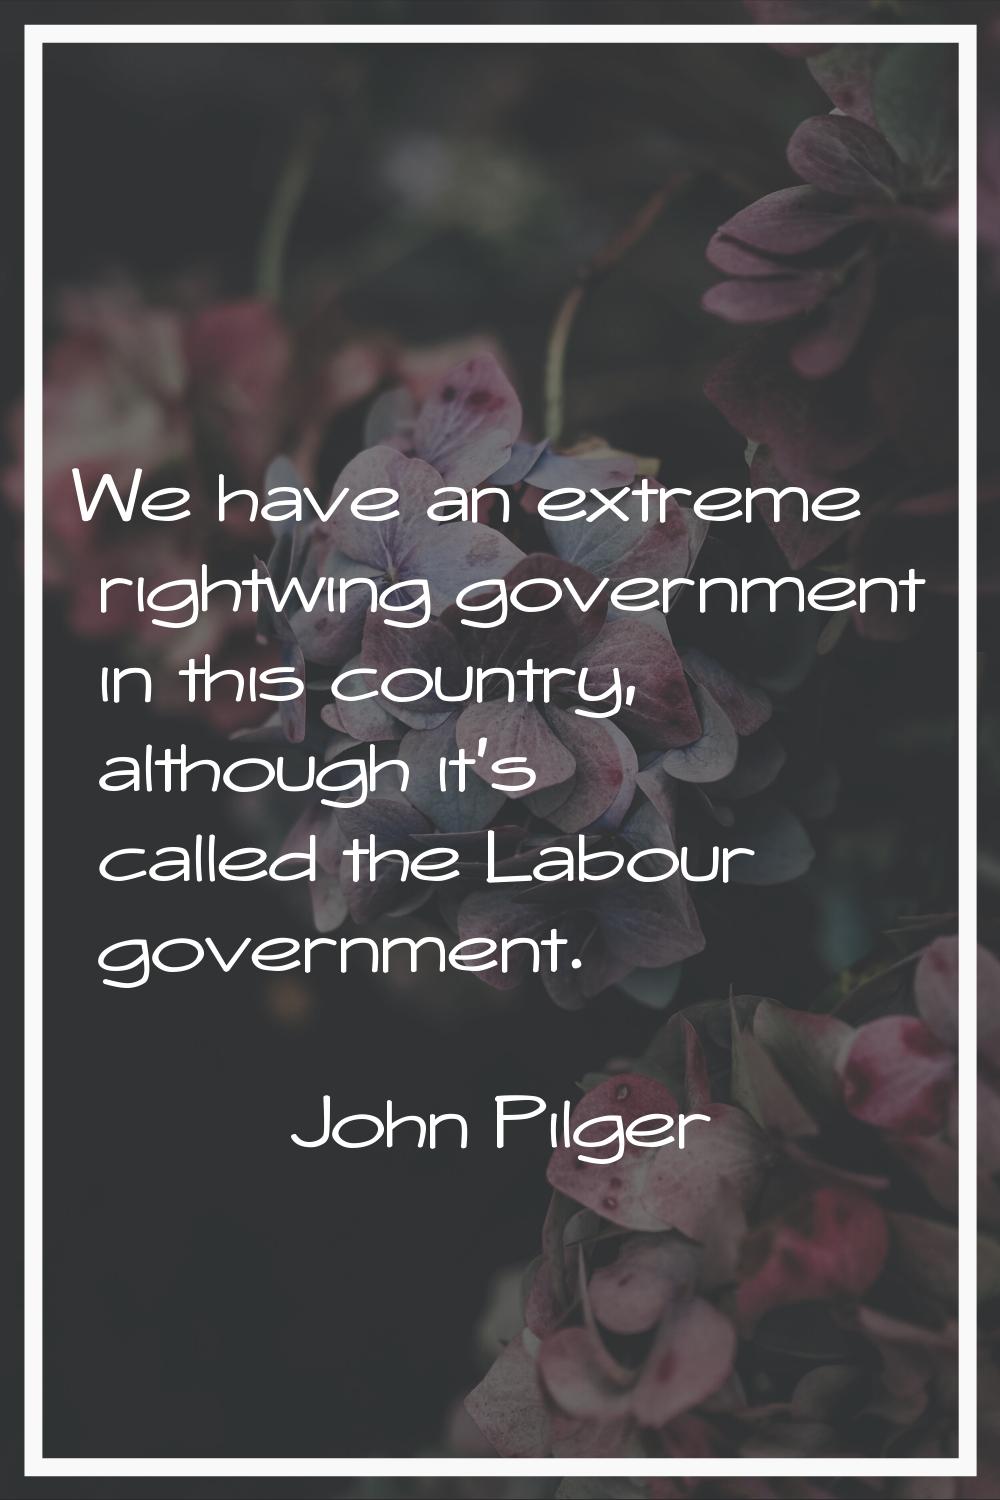 We have an extreme rightwing government in this country, although it's called the Labour government